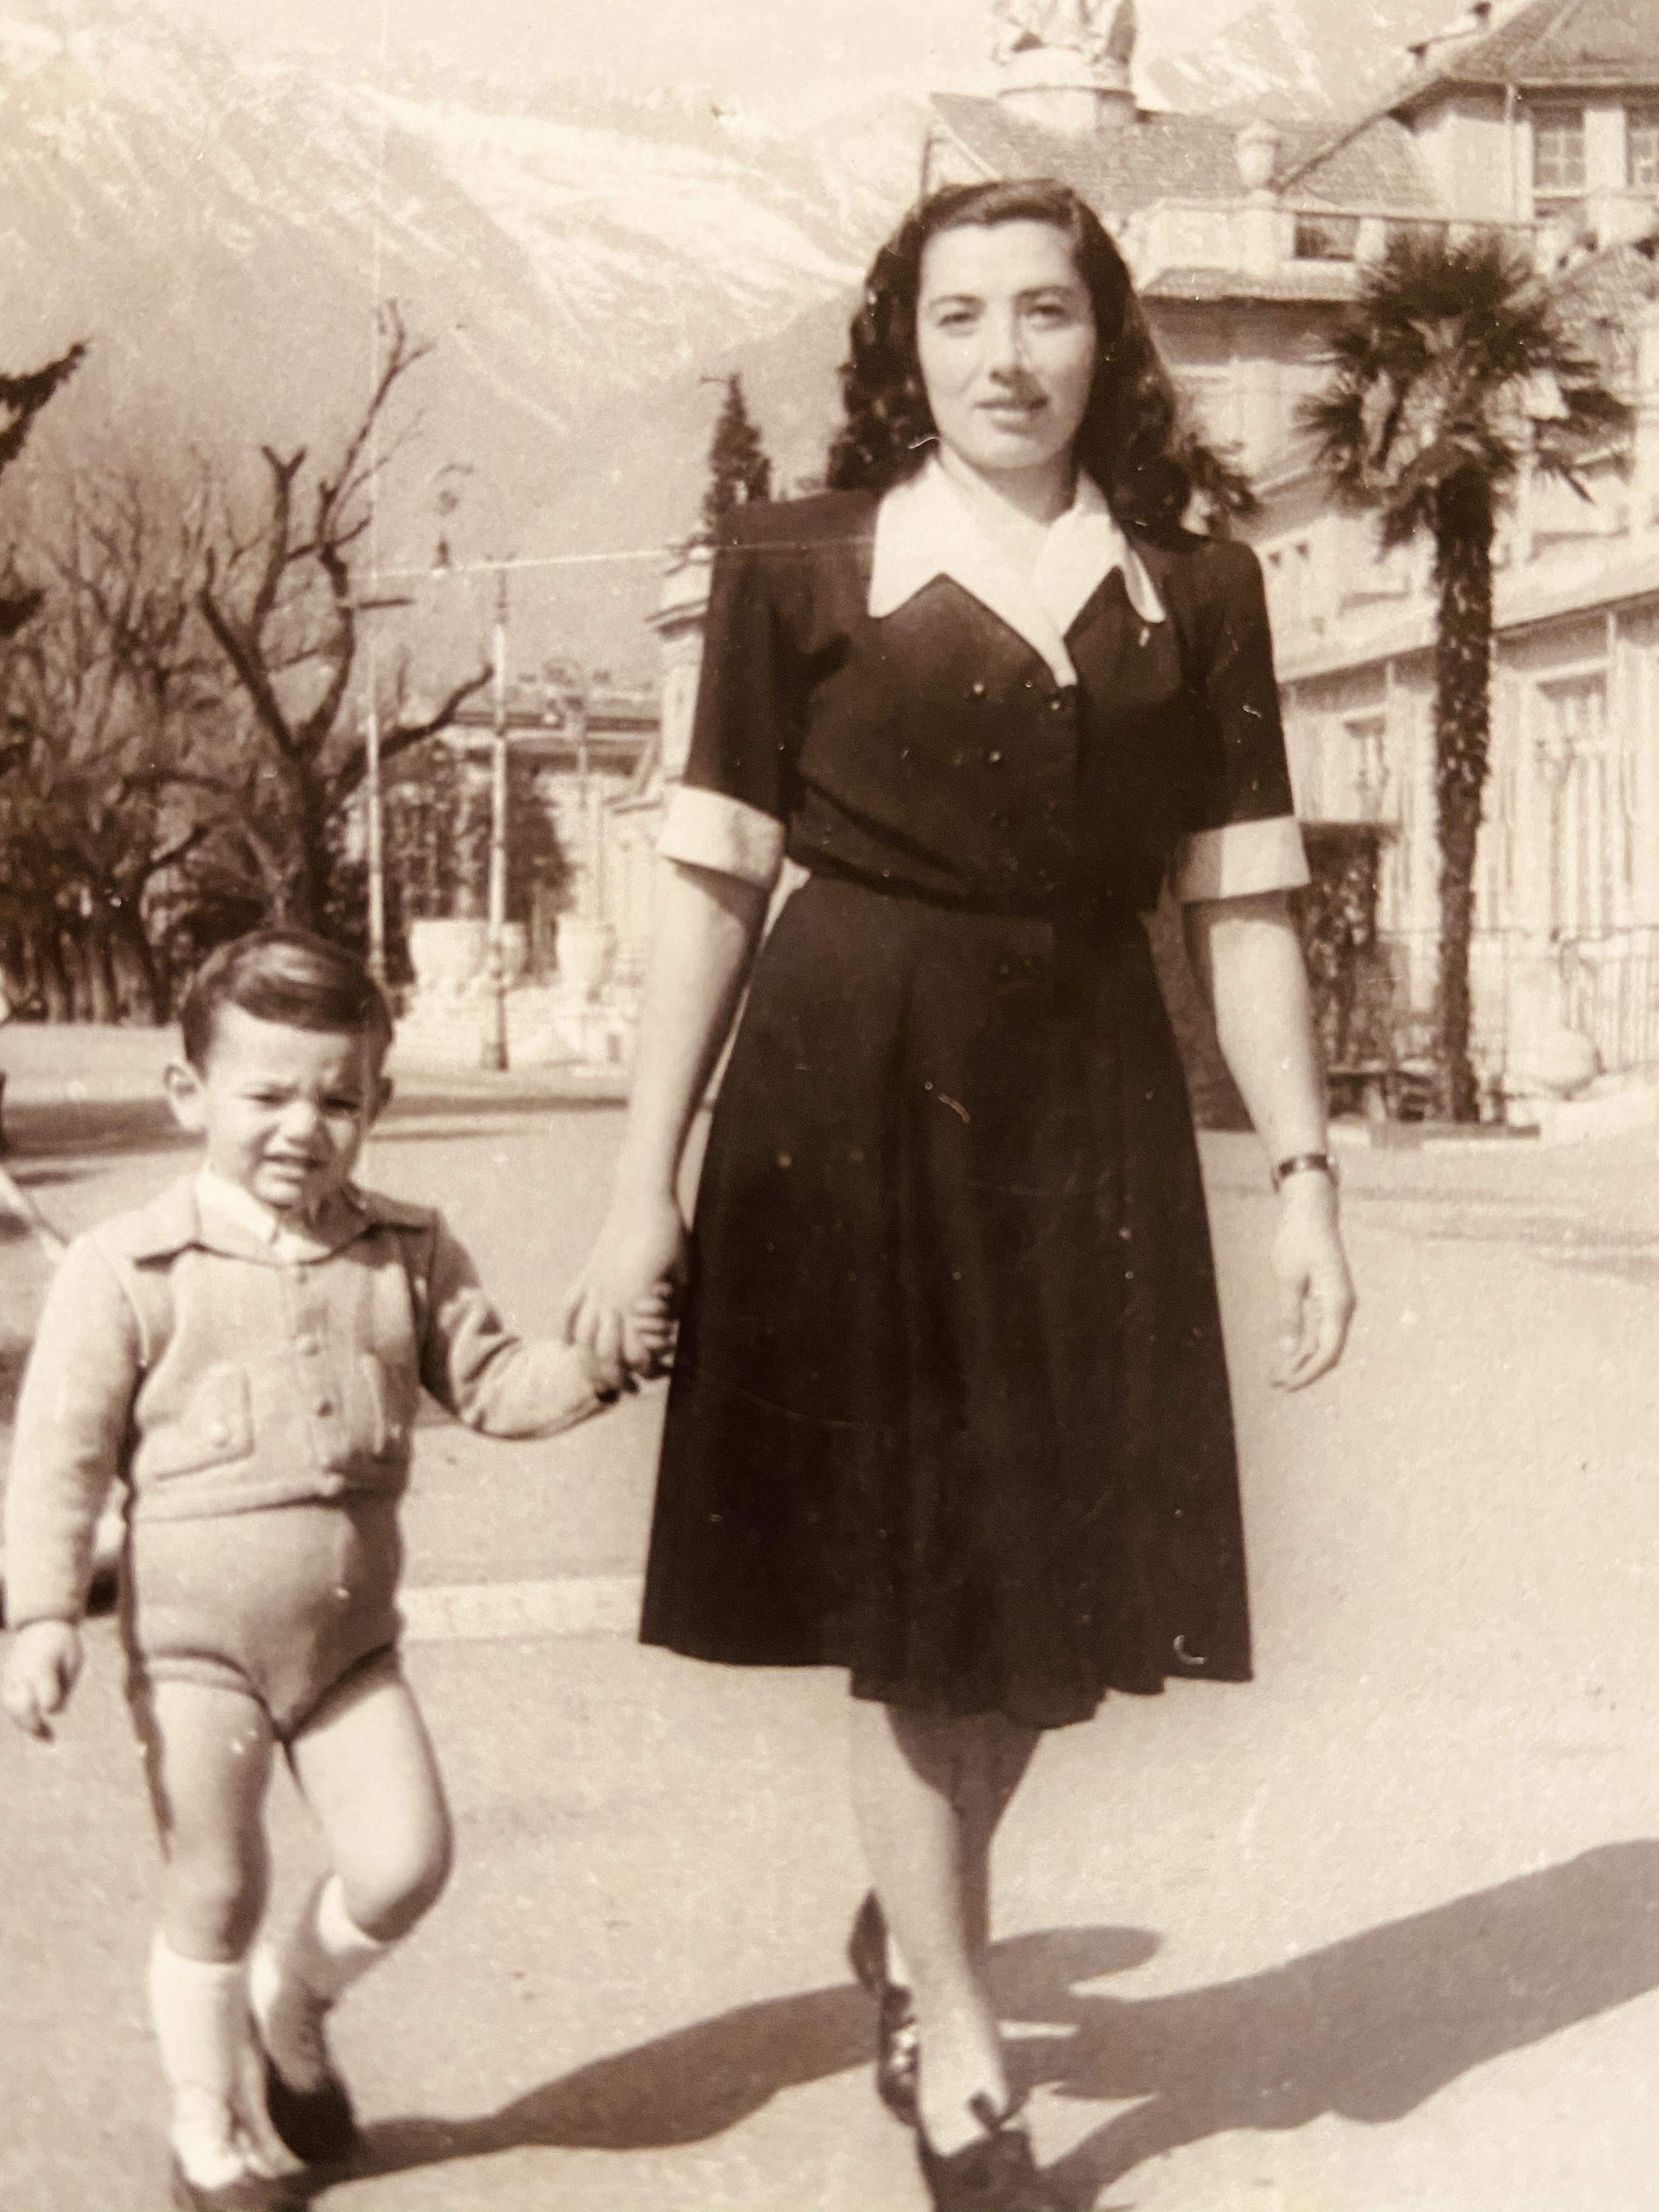 Esther Kahn with her young son Shimon in Italy, on their way to Israel in 1949.